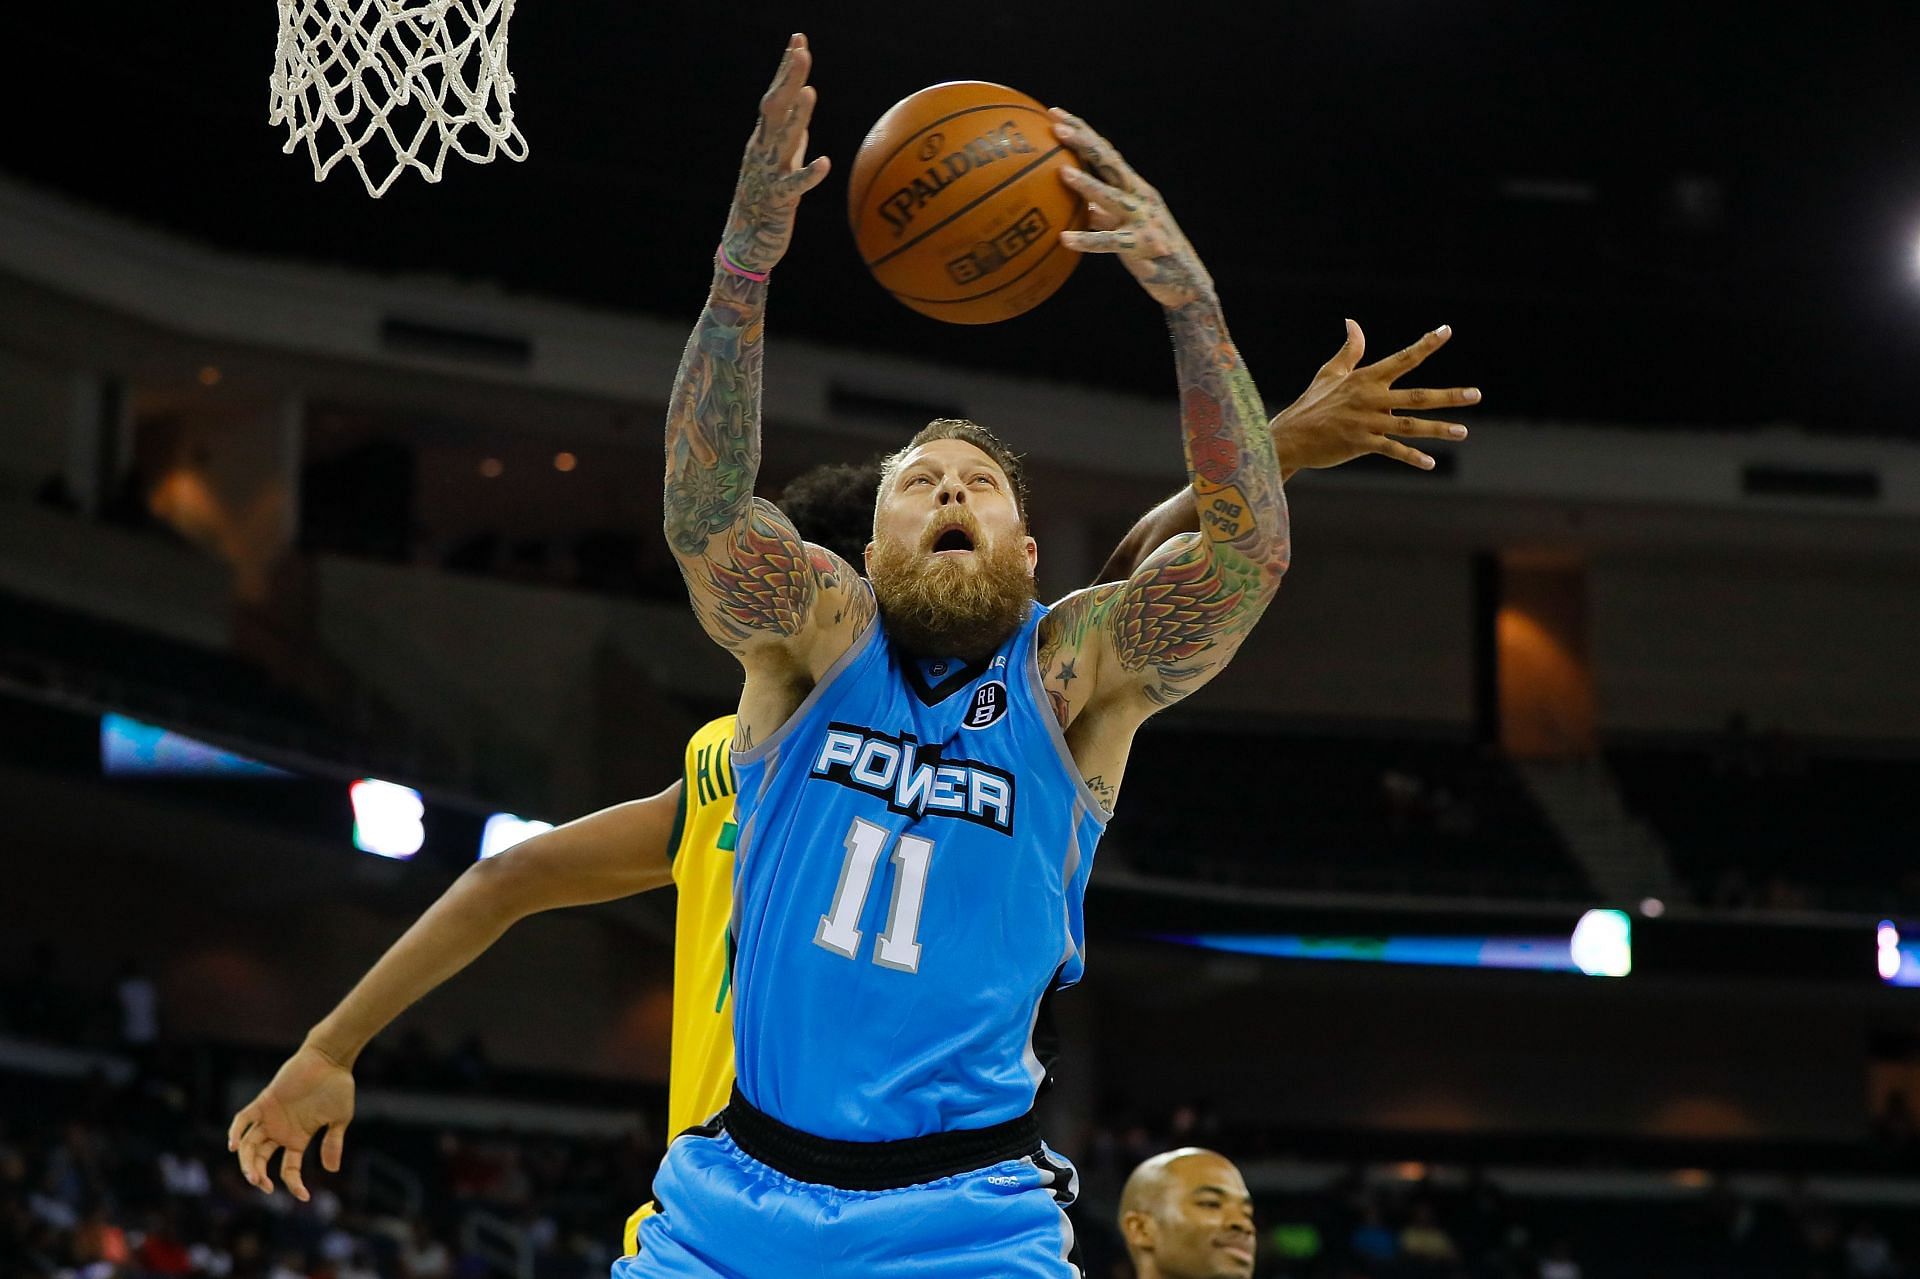 Birdman had a good run in the Big3 league as well (Image via Getty Images)